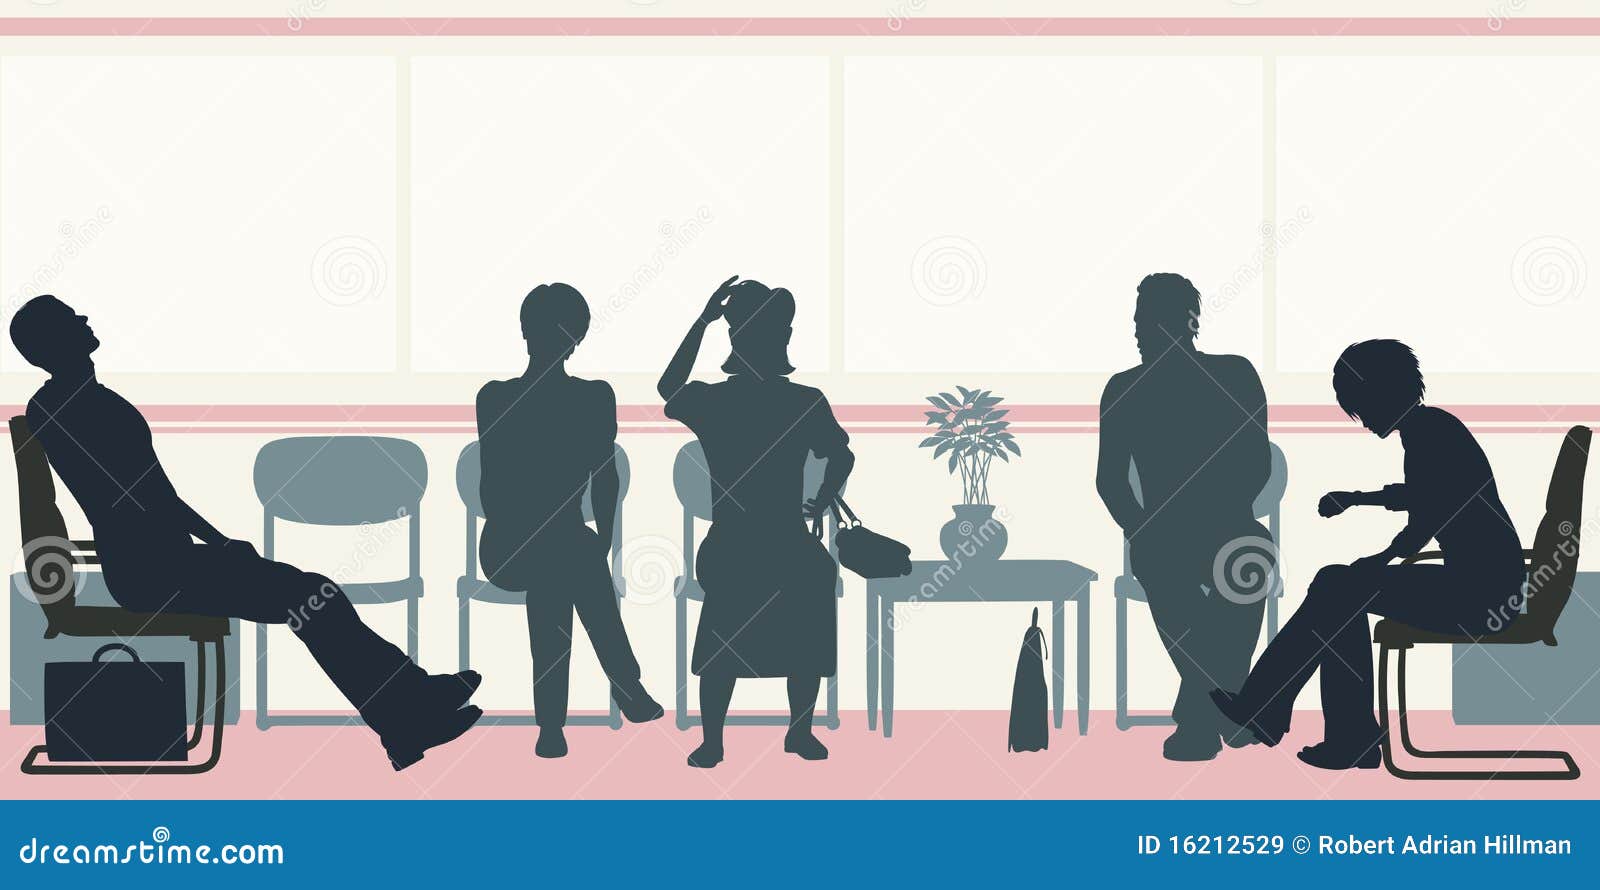 clipart waiting room - photo #15